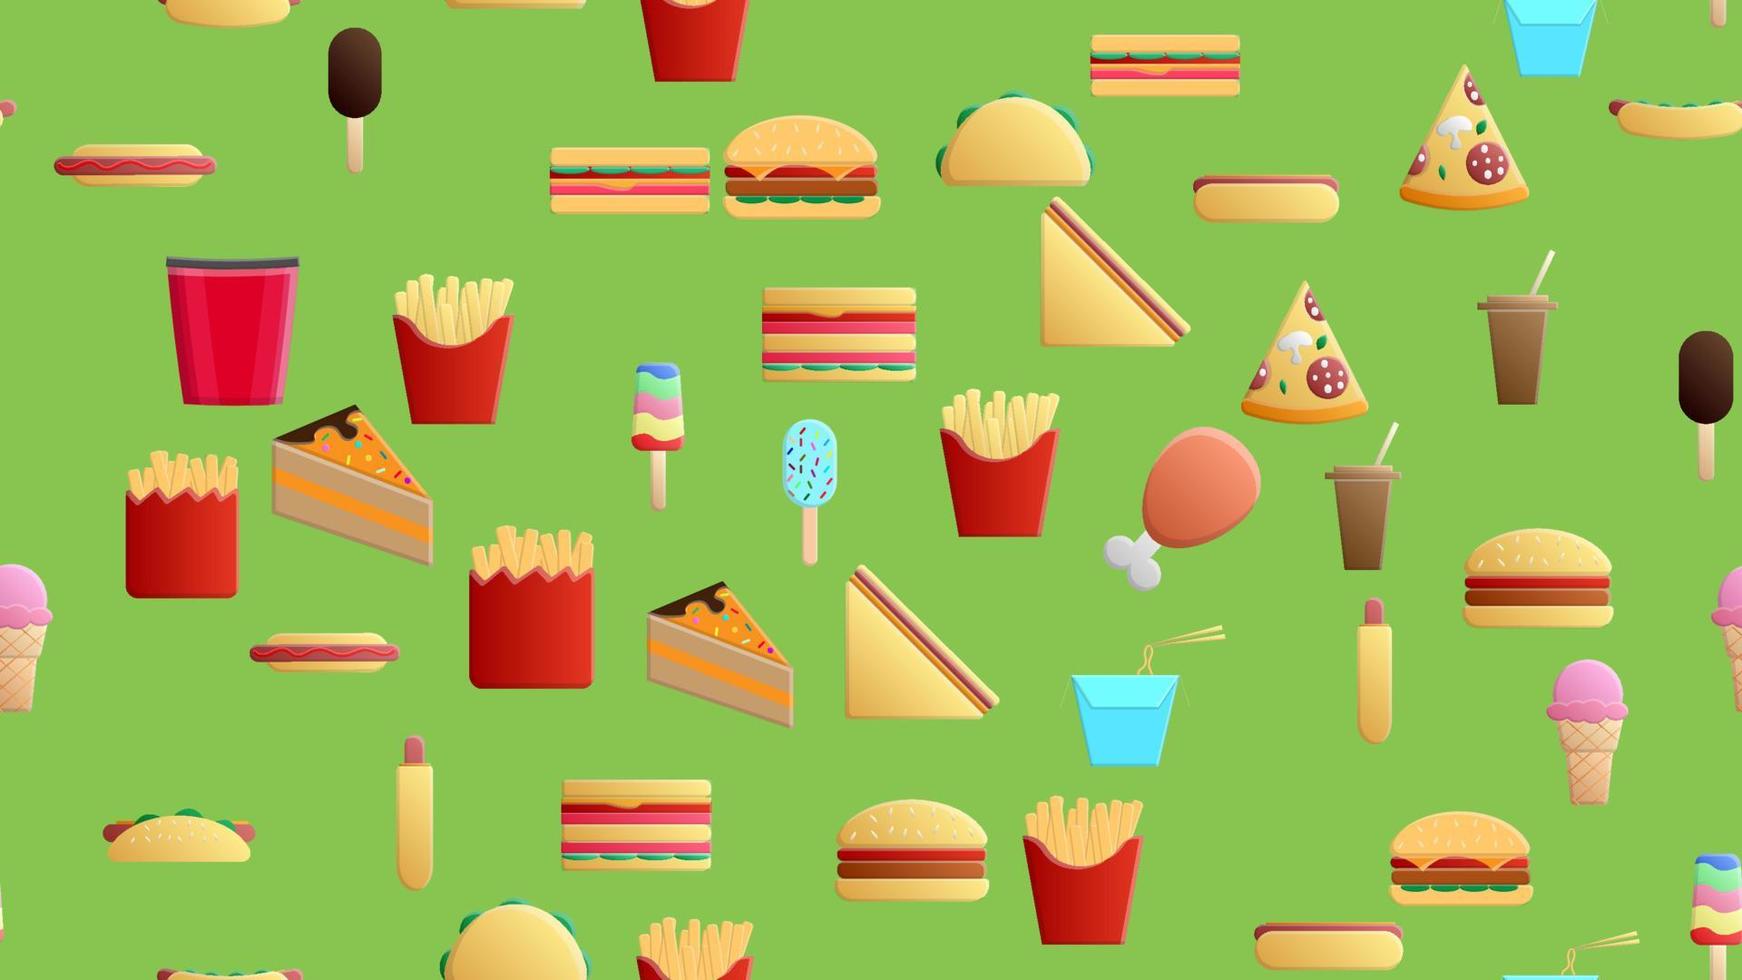 Endless green seamless pattern of delicious food and snack items icons set for restaurant bar cafe fries, hotdog, sandwich, cake, ice cream, popcorn, burger. The background vector